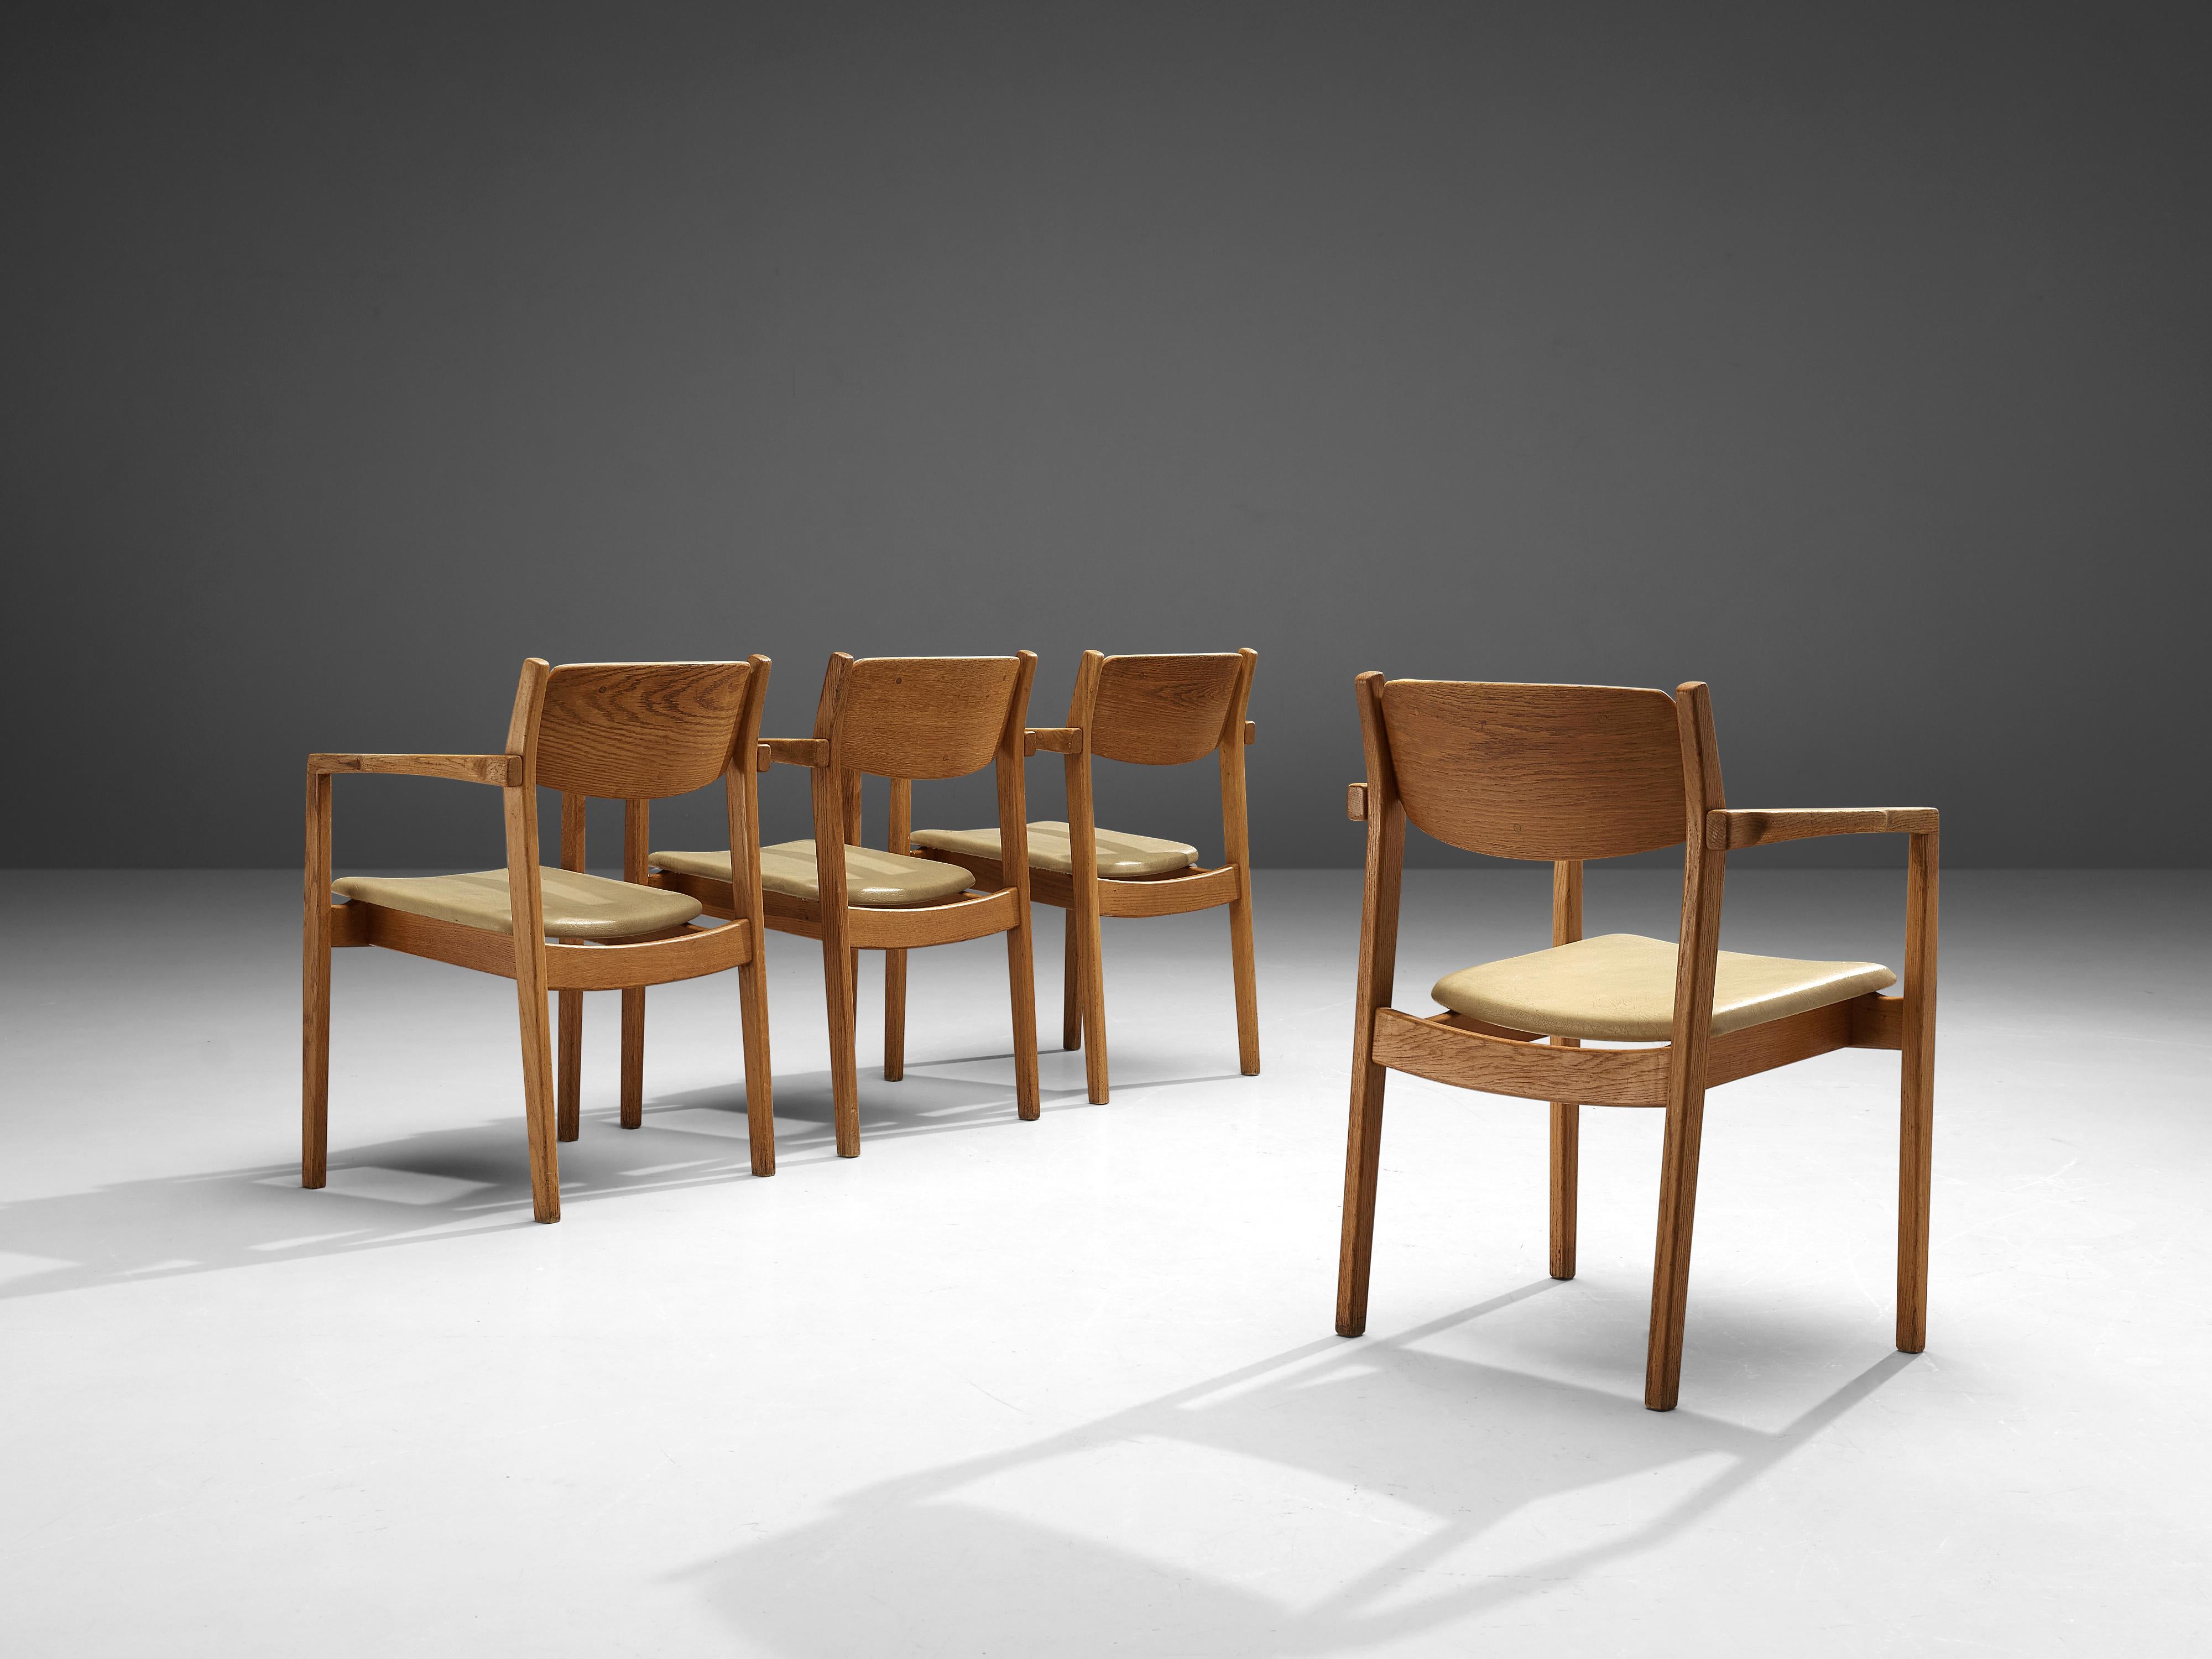 Set of four armchairs, oak, leatherette, Denmark, 1960s

Set of four sculpted dining chairs in solid oak and leatherette upholstery. These chairs show the characteristics of well-crafted furniture. Wood joints are shown at the armrests and highlight